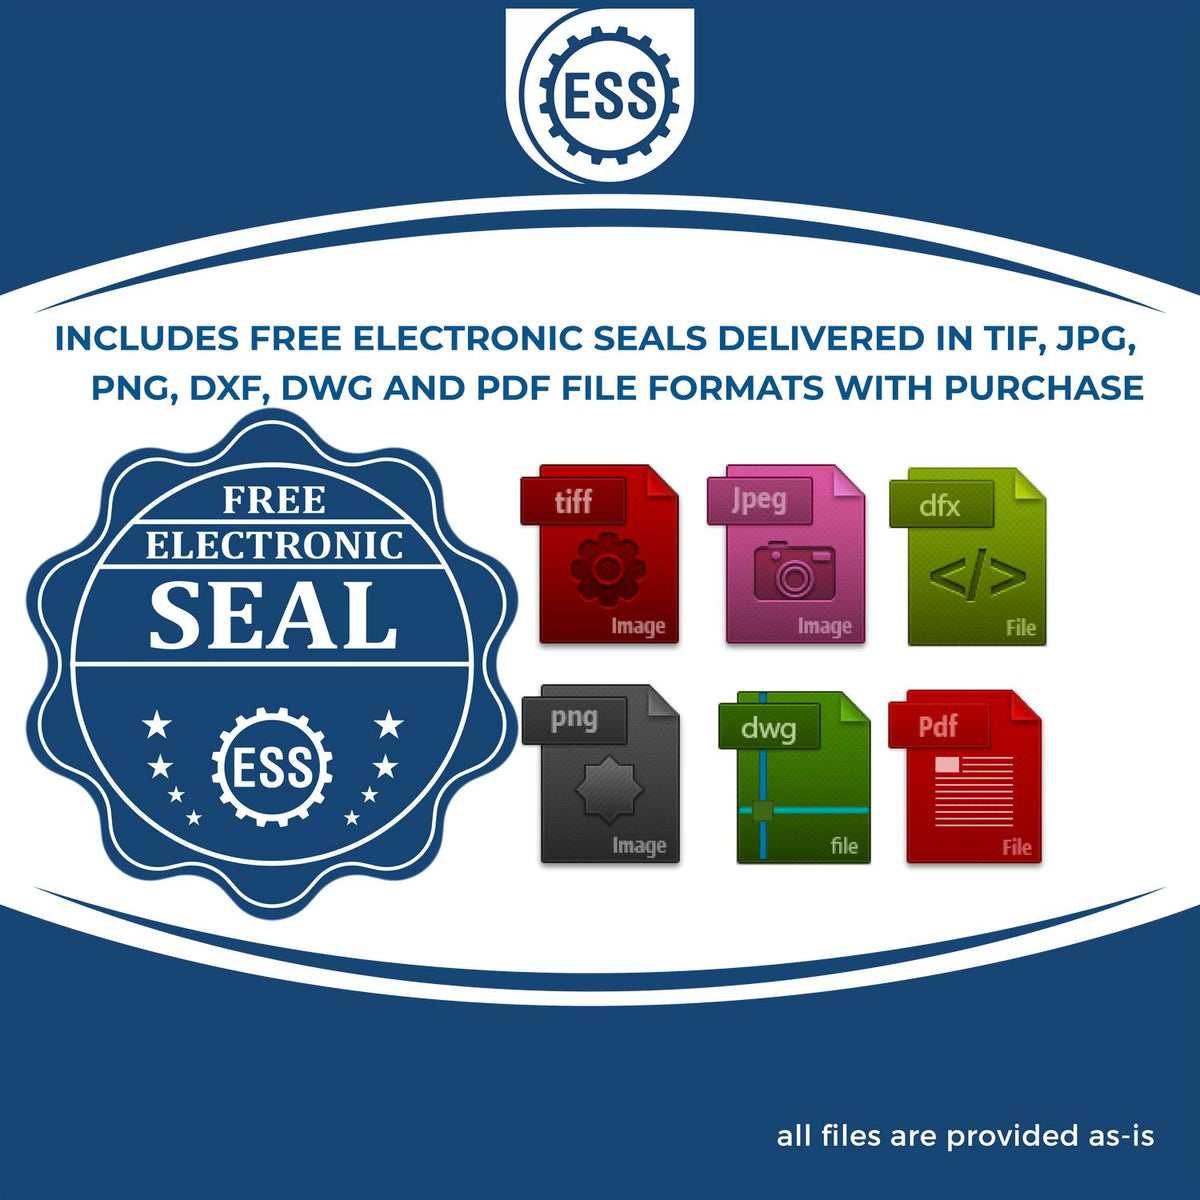 An infographic for the free electronic seal for the Gift Hawaii Landscape Architect Seal illustrating the different file type icons such as DXF, DWG, TIF, JPG and PNG.